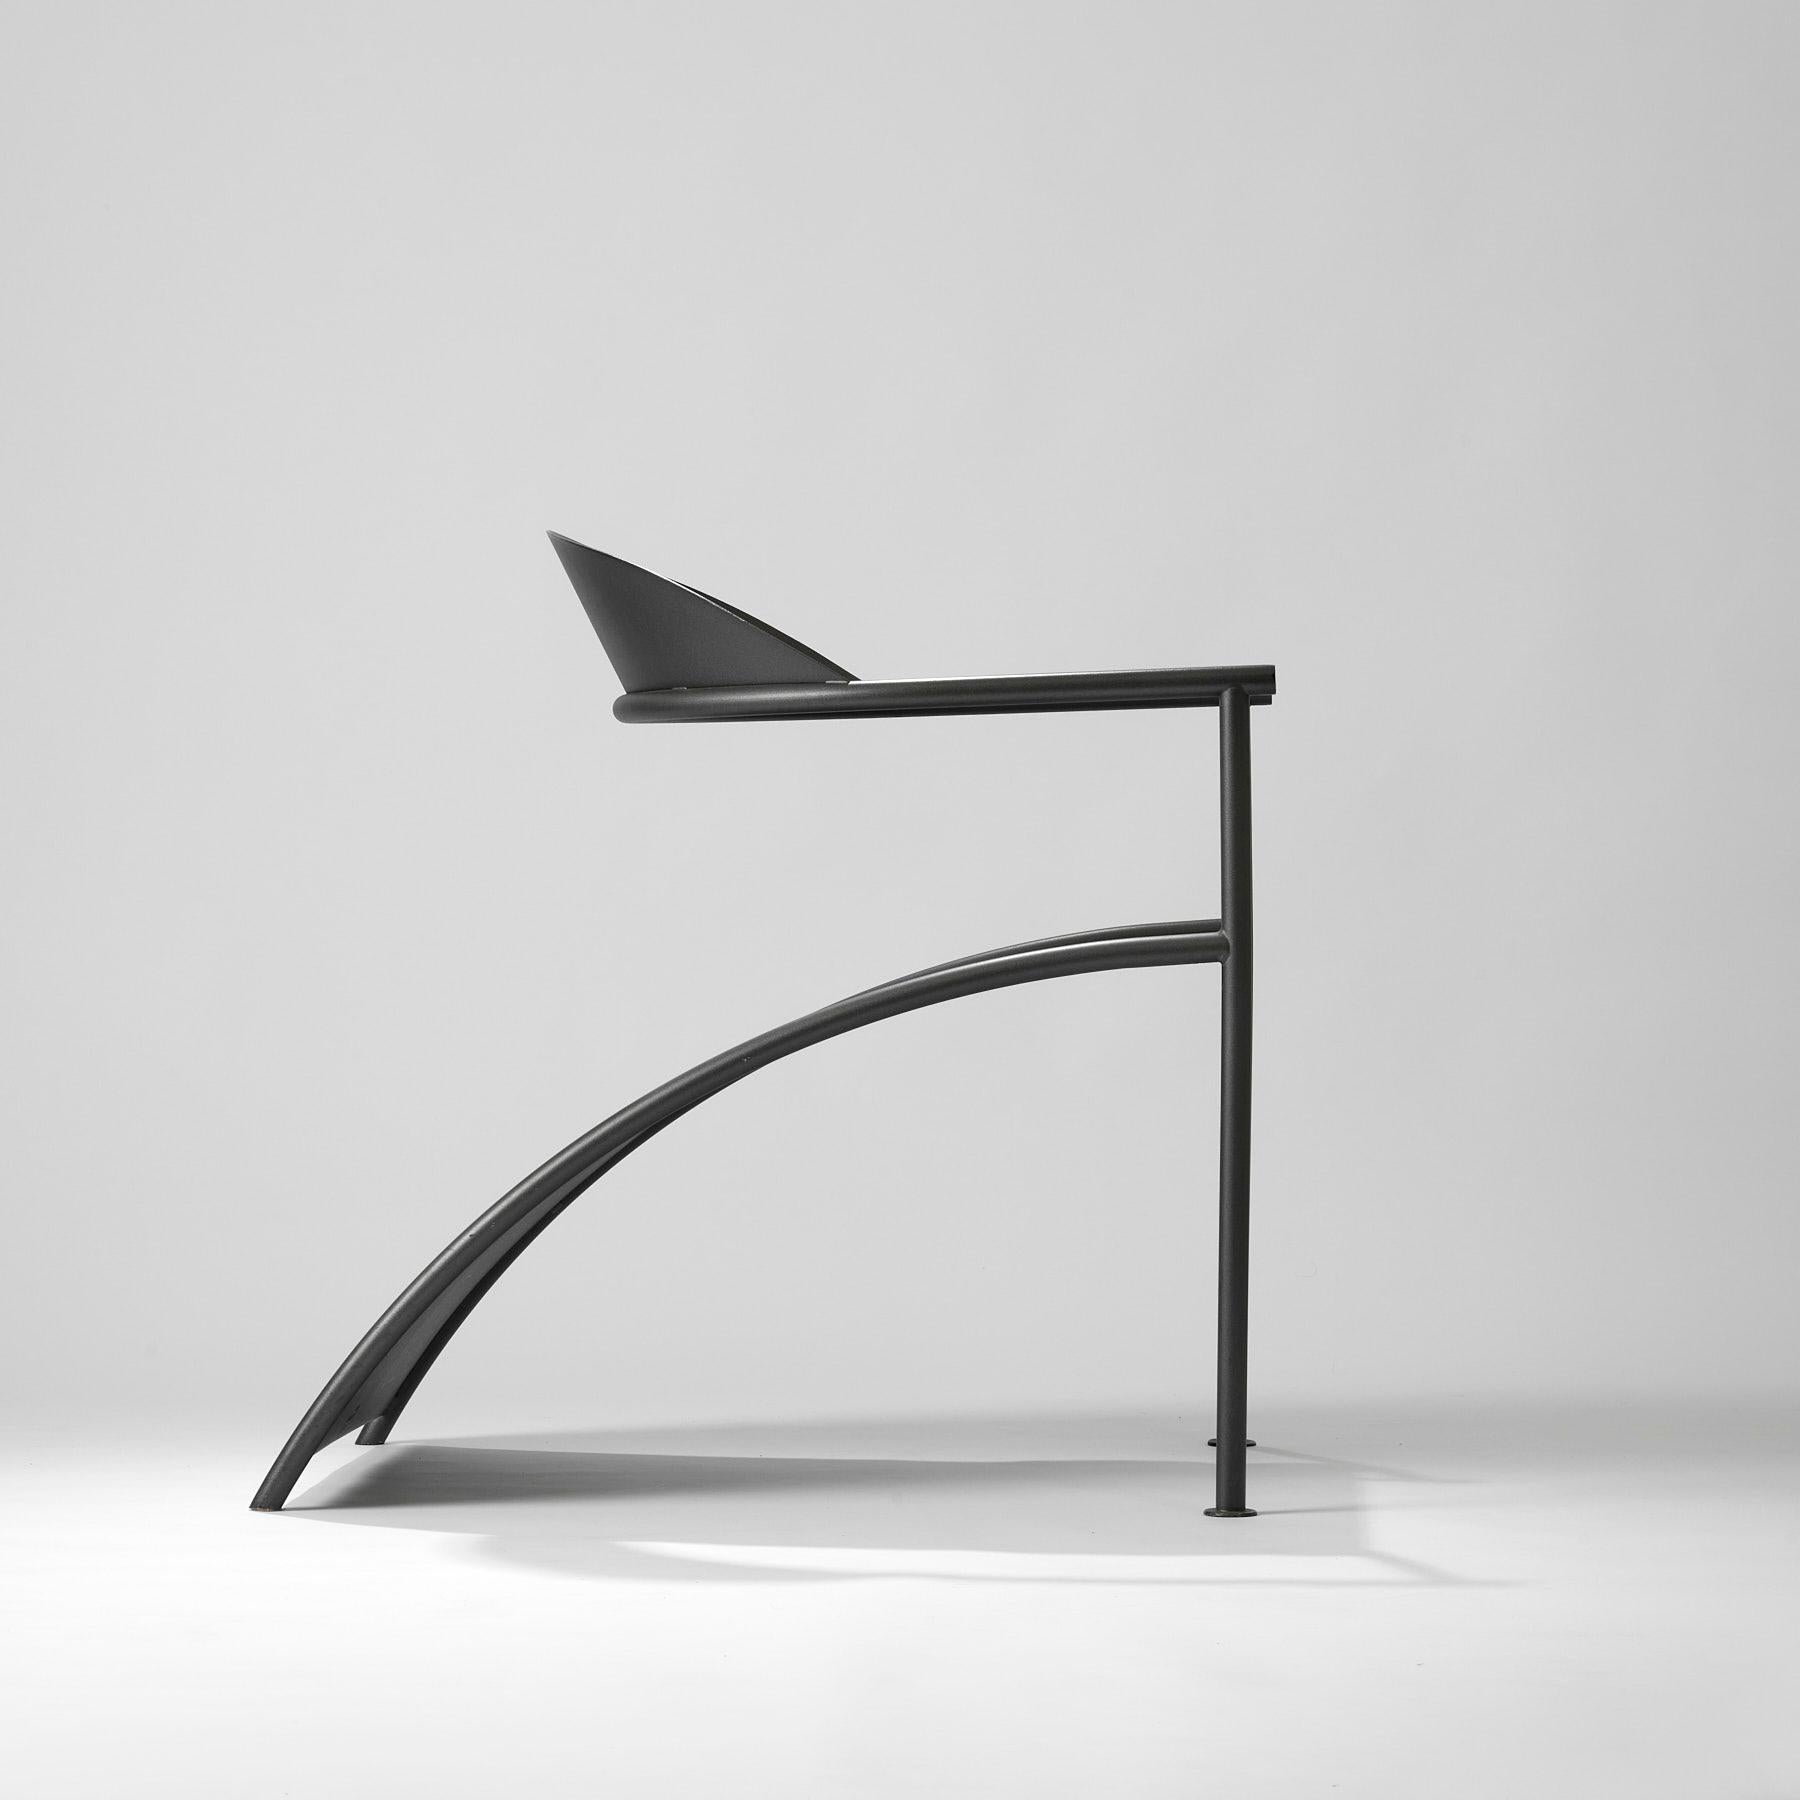 PHILIPPE STARCK (Born in 1949)
Pat Conley 2 armchair, circa 1986
XO publisher 
Anthracite grey lacquered plate
H. 74 cm - L. 54.5 cm - P. 76 cm